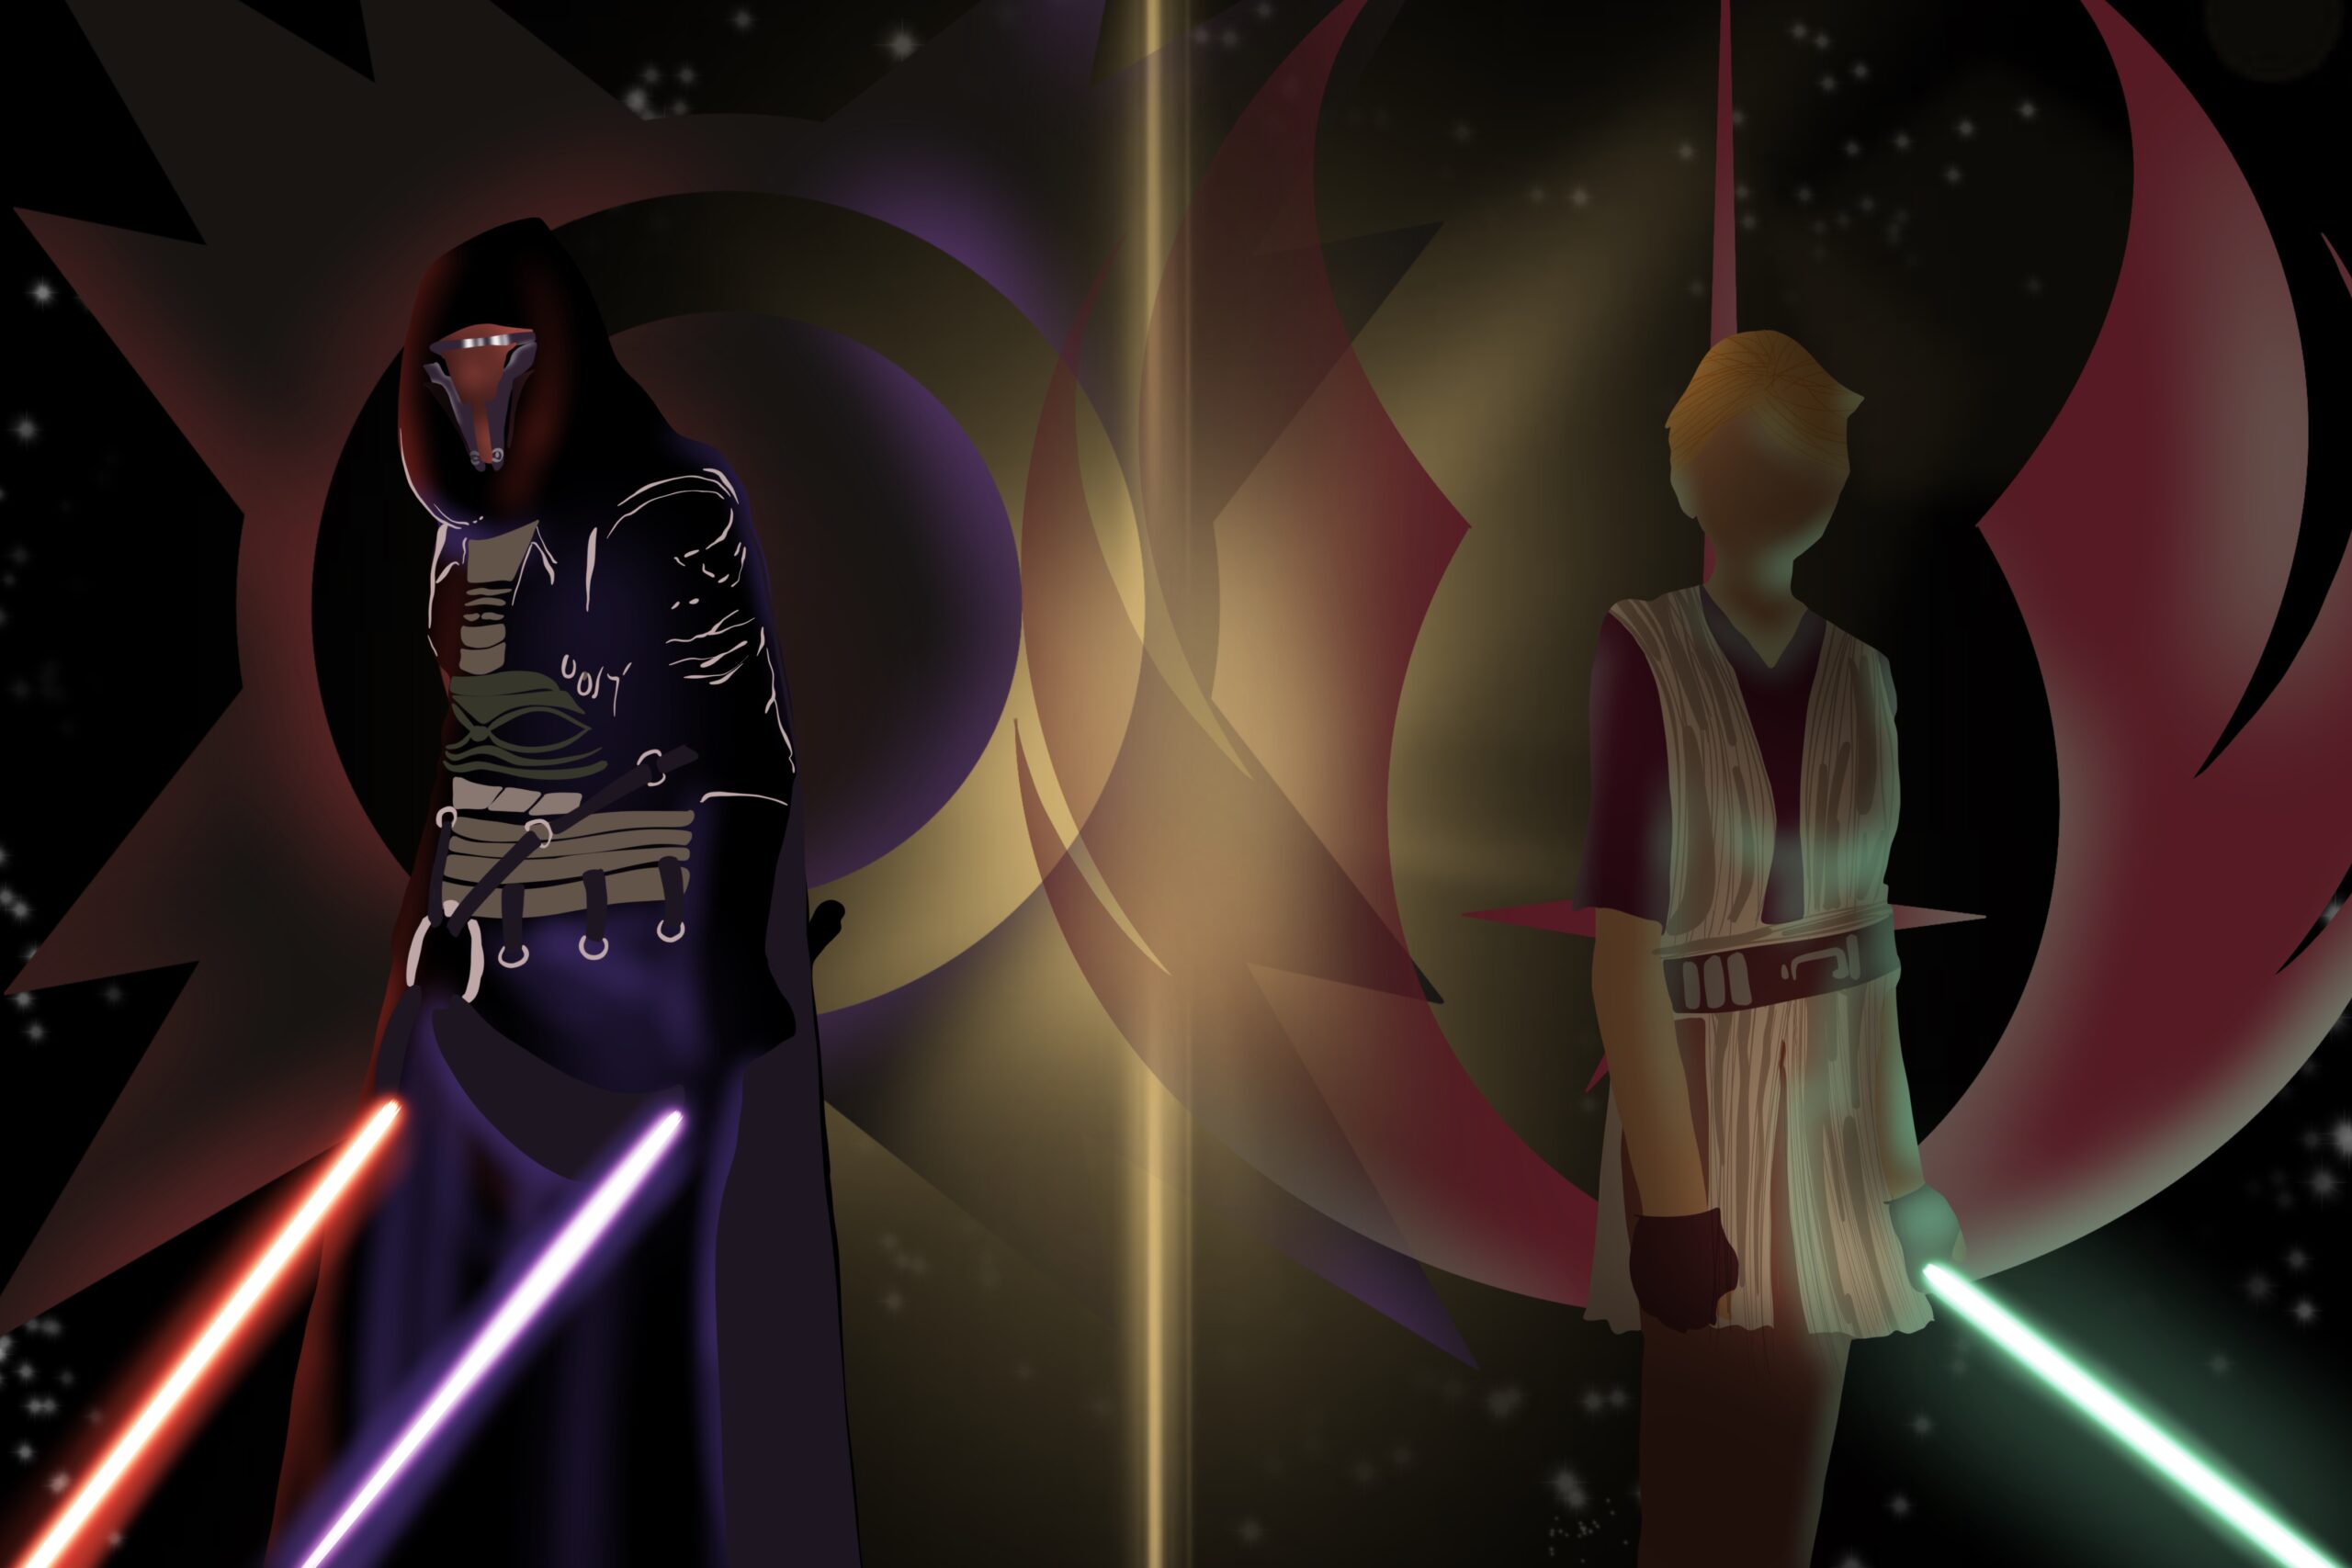 Two robed figures with swords stand against a black background bisected in half by a golden glow, framed by red symbols. The figure to the right is dressed in light robes, has a blue sword and blond hair; his symbol is round and curved. The figure to the right is dressed in dark robes, has two blade -- red and purple -- and a mask; his symbol is squared and point.